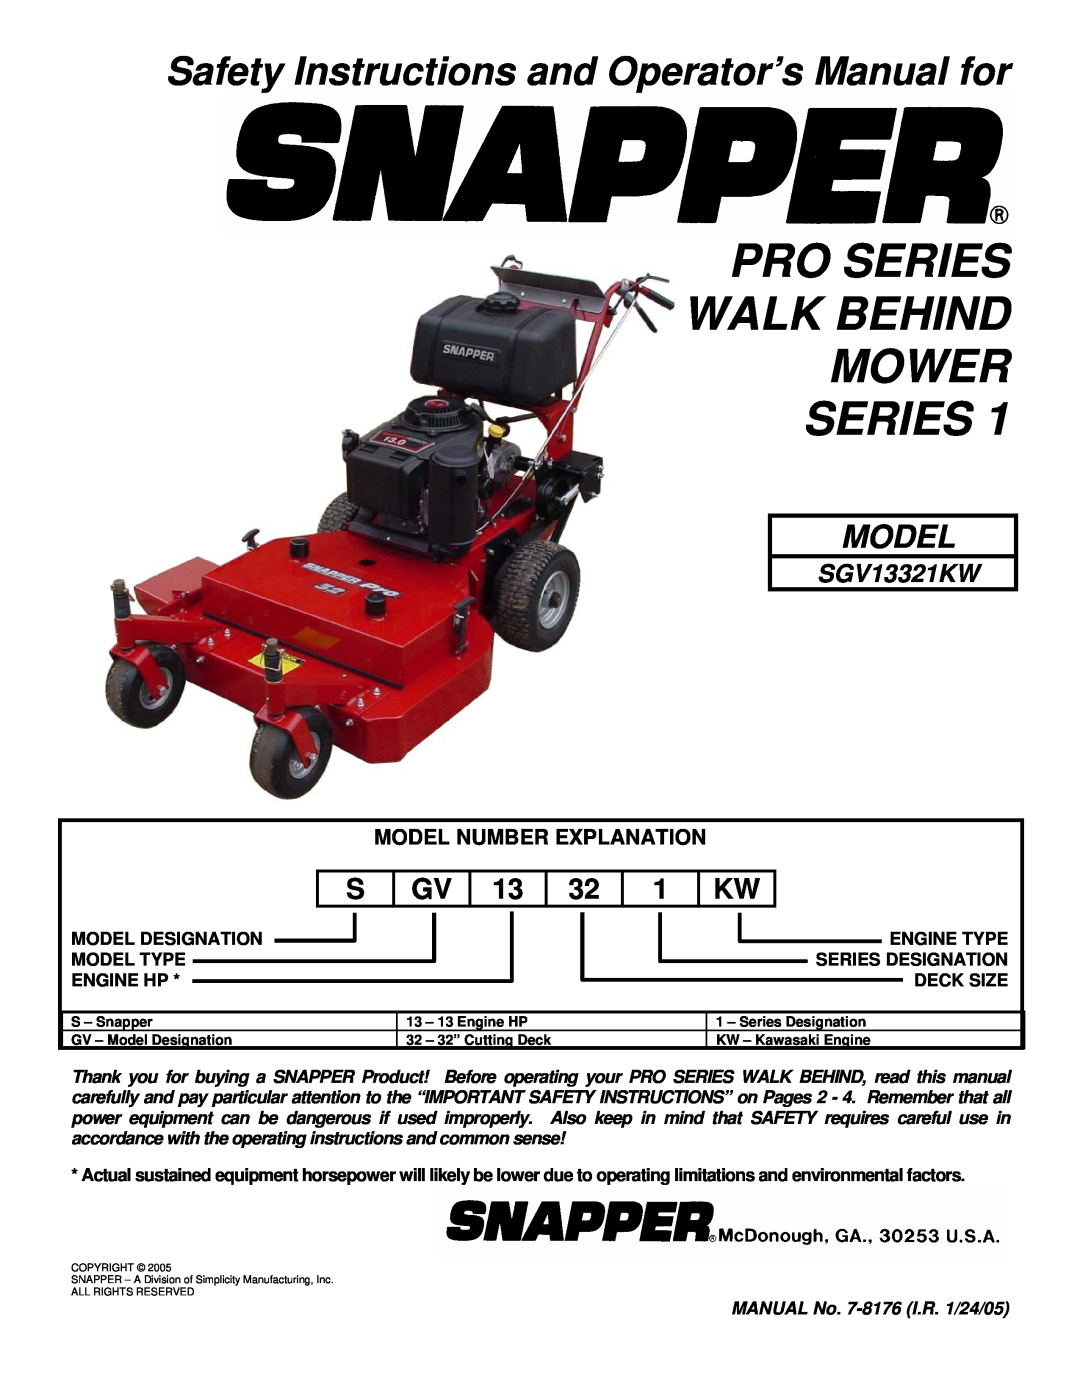 Snapper SGV13321KW important safety instructions Pro Series Walk Behind Mower Series, Model Number Explanation 